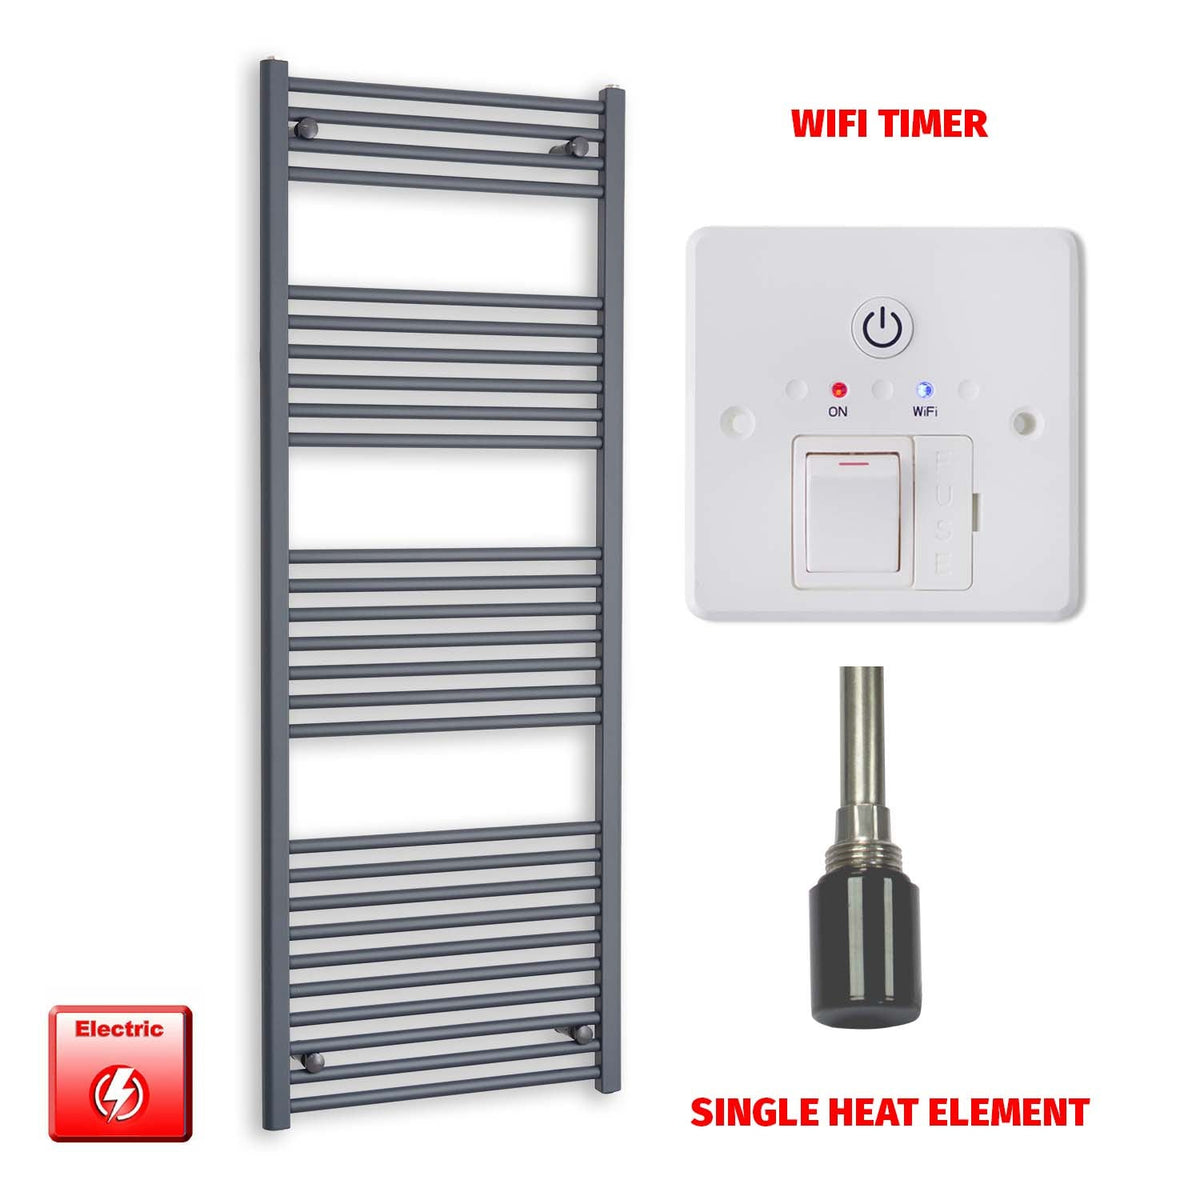 1600mm High 600mm Wide Flat Anthracite Pre-Filled Electric Heated Towel Rail Radiator HTR Single heat element Wifi timer